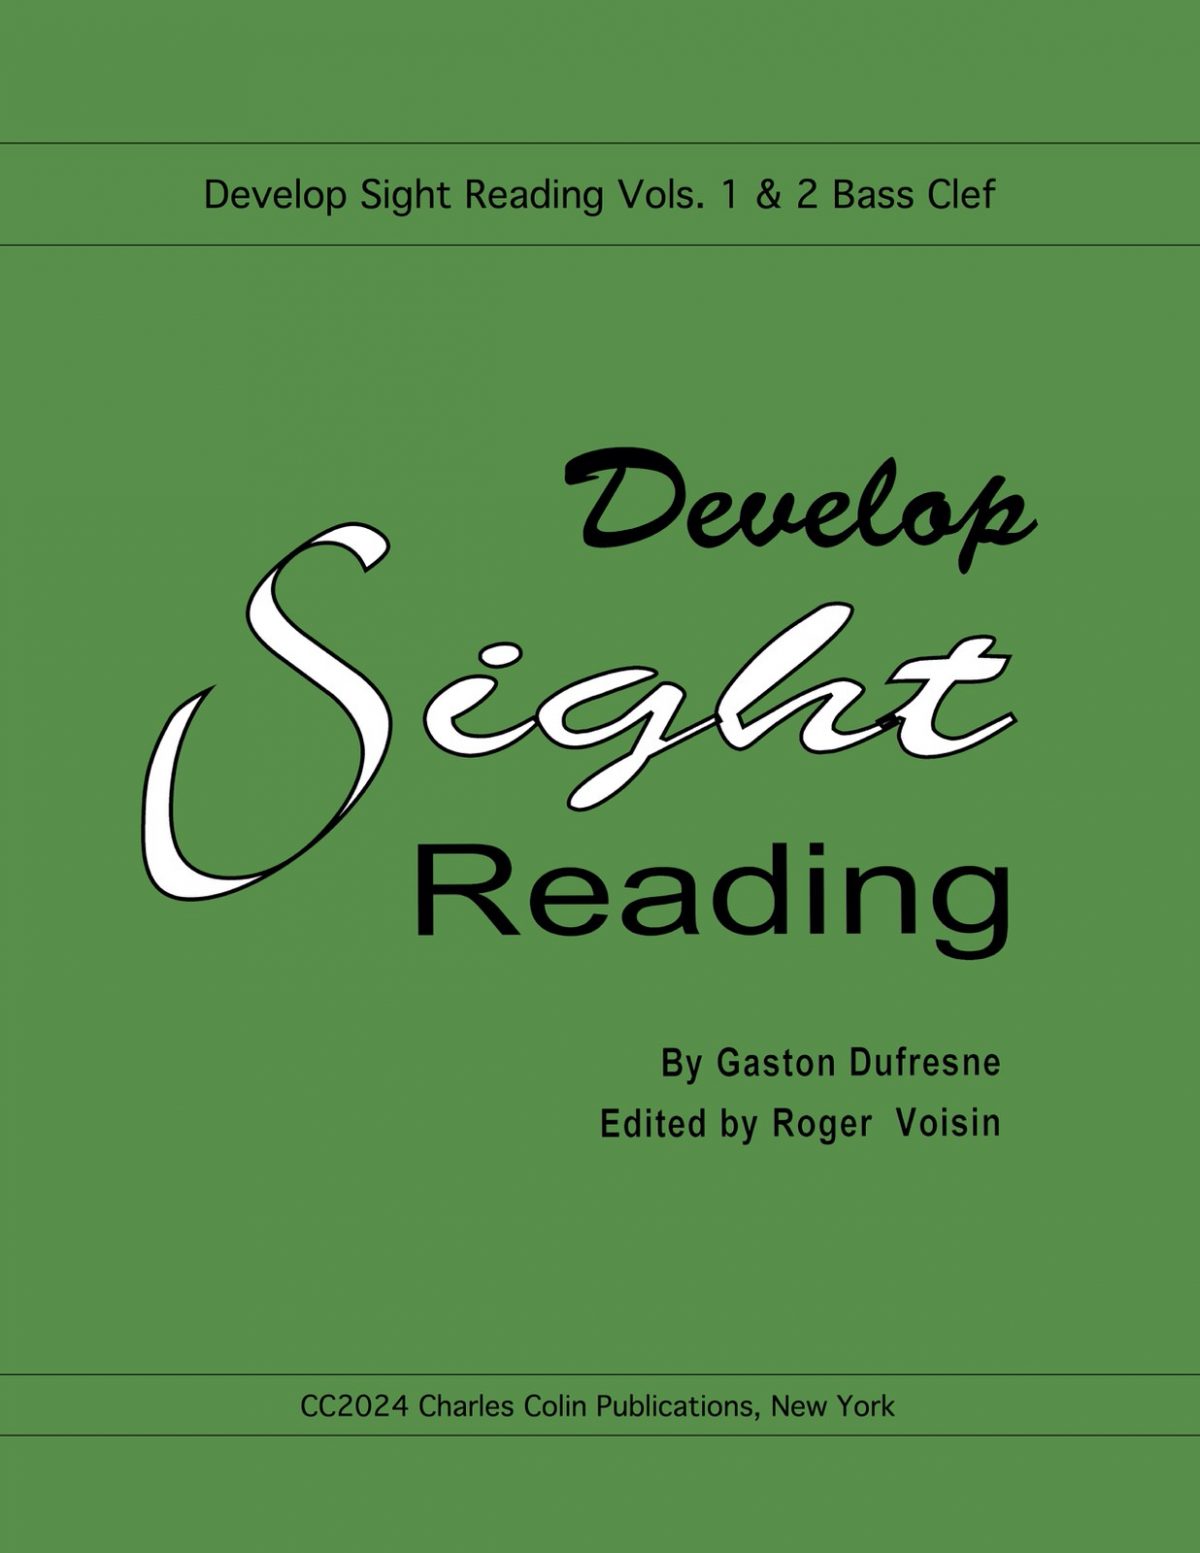 Develop Sight Reading (Bass Clef)